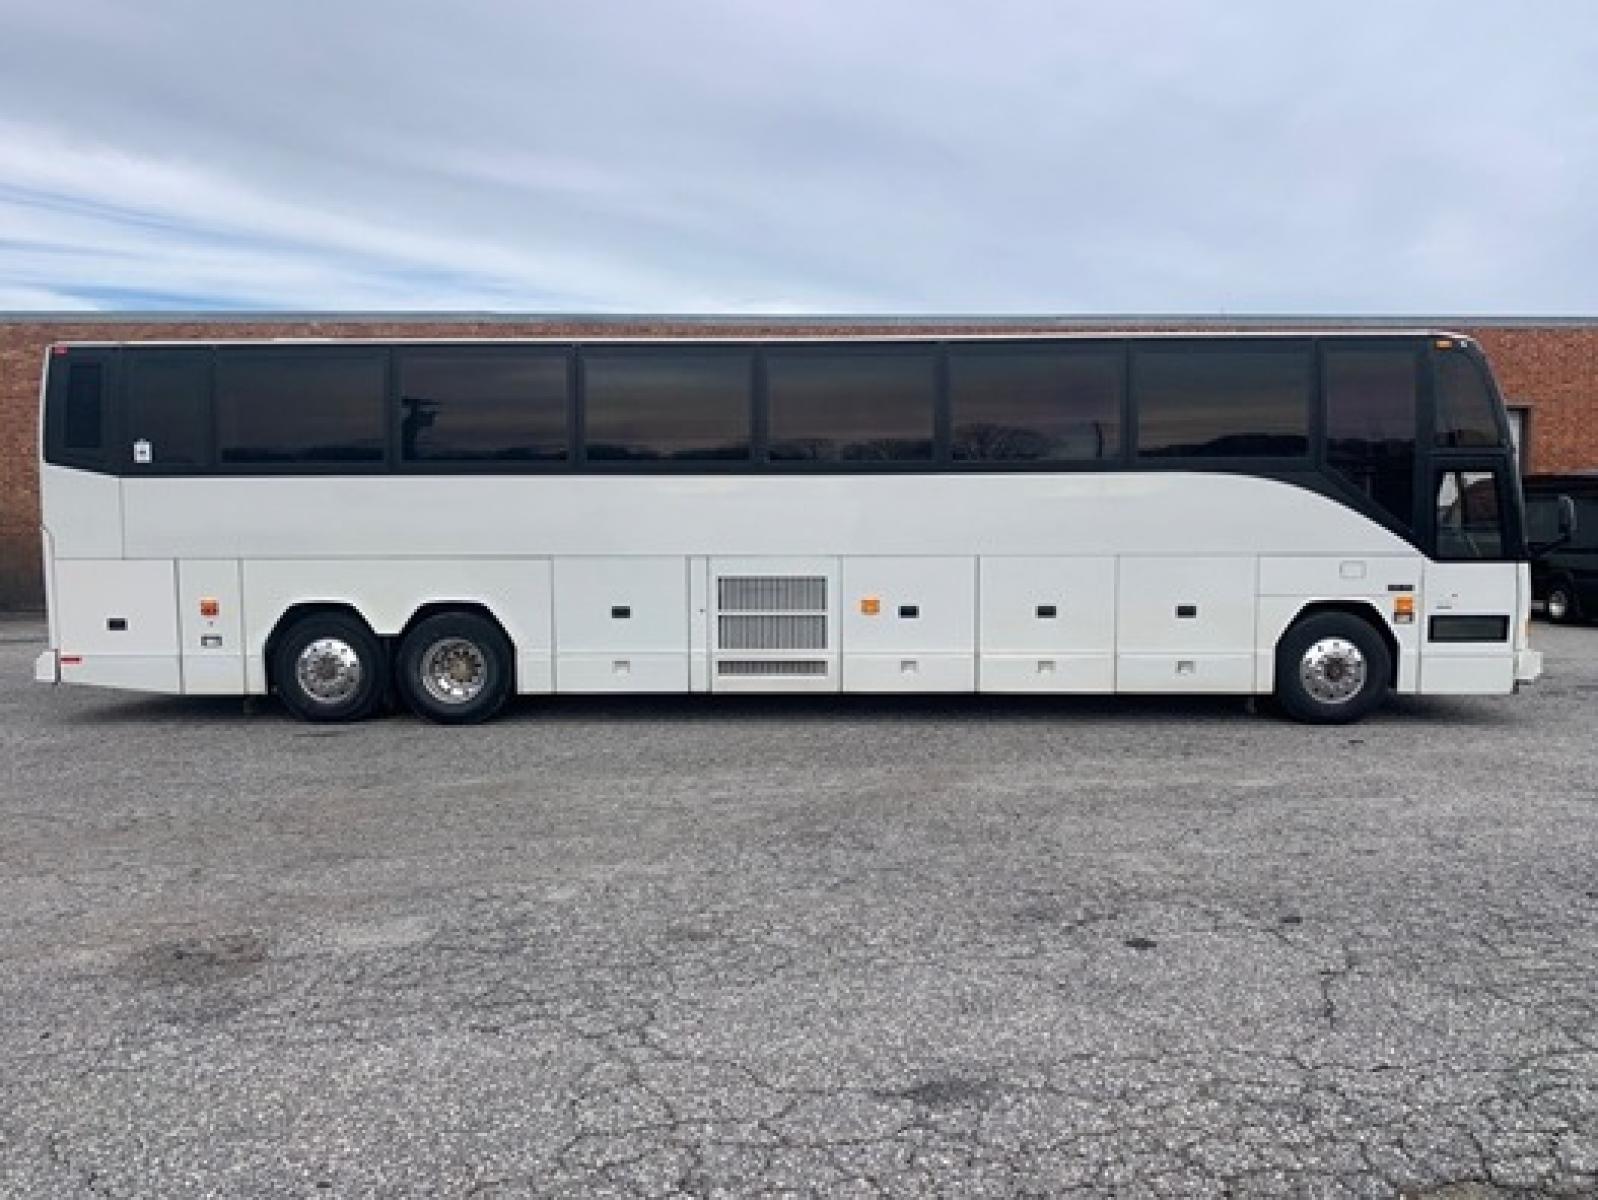 1995 White Prevost HS-45 with an Diesel engine, Allison transmission, 0.000000, 0.000000 - 1995 PREVOST HS-45 - Series 60 Detroit Diesel - Allison Automatic Transmission - 45' - Alloy Wheels - 56 Passengers - Enclosed Parcel Racks - 3 Flat Screens and DVD - Restroom - One Owner - Southern Coach Approx 1.1mil recent motor trans change. - Photo #1